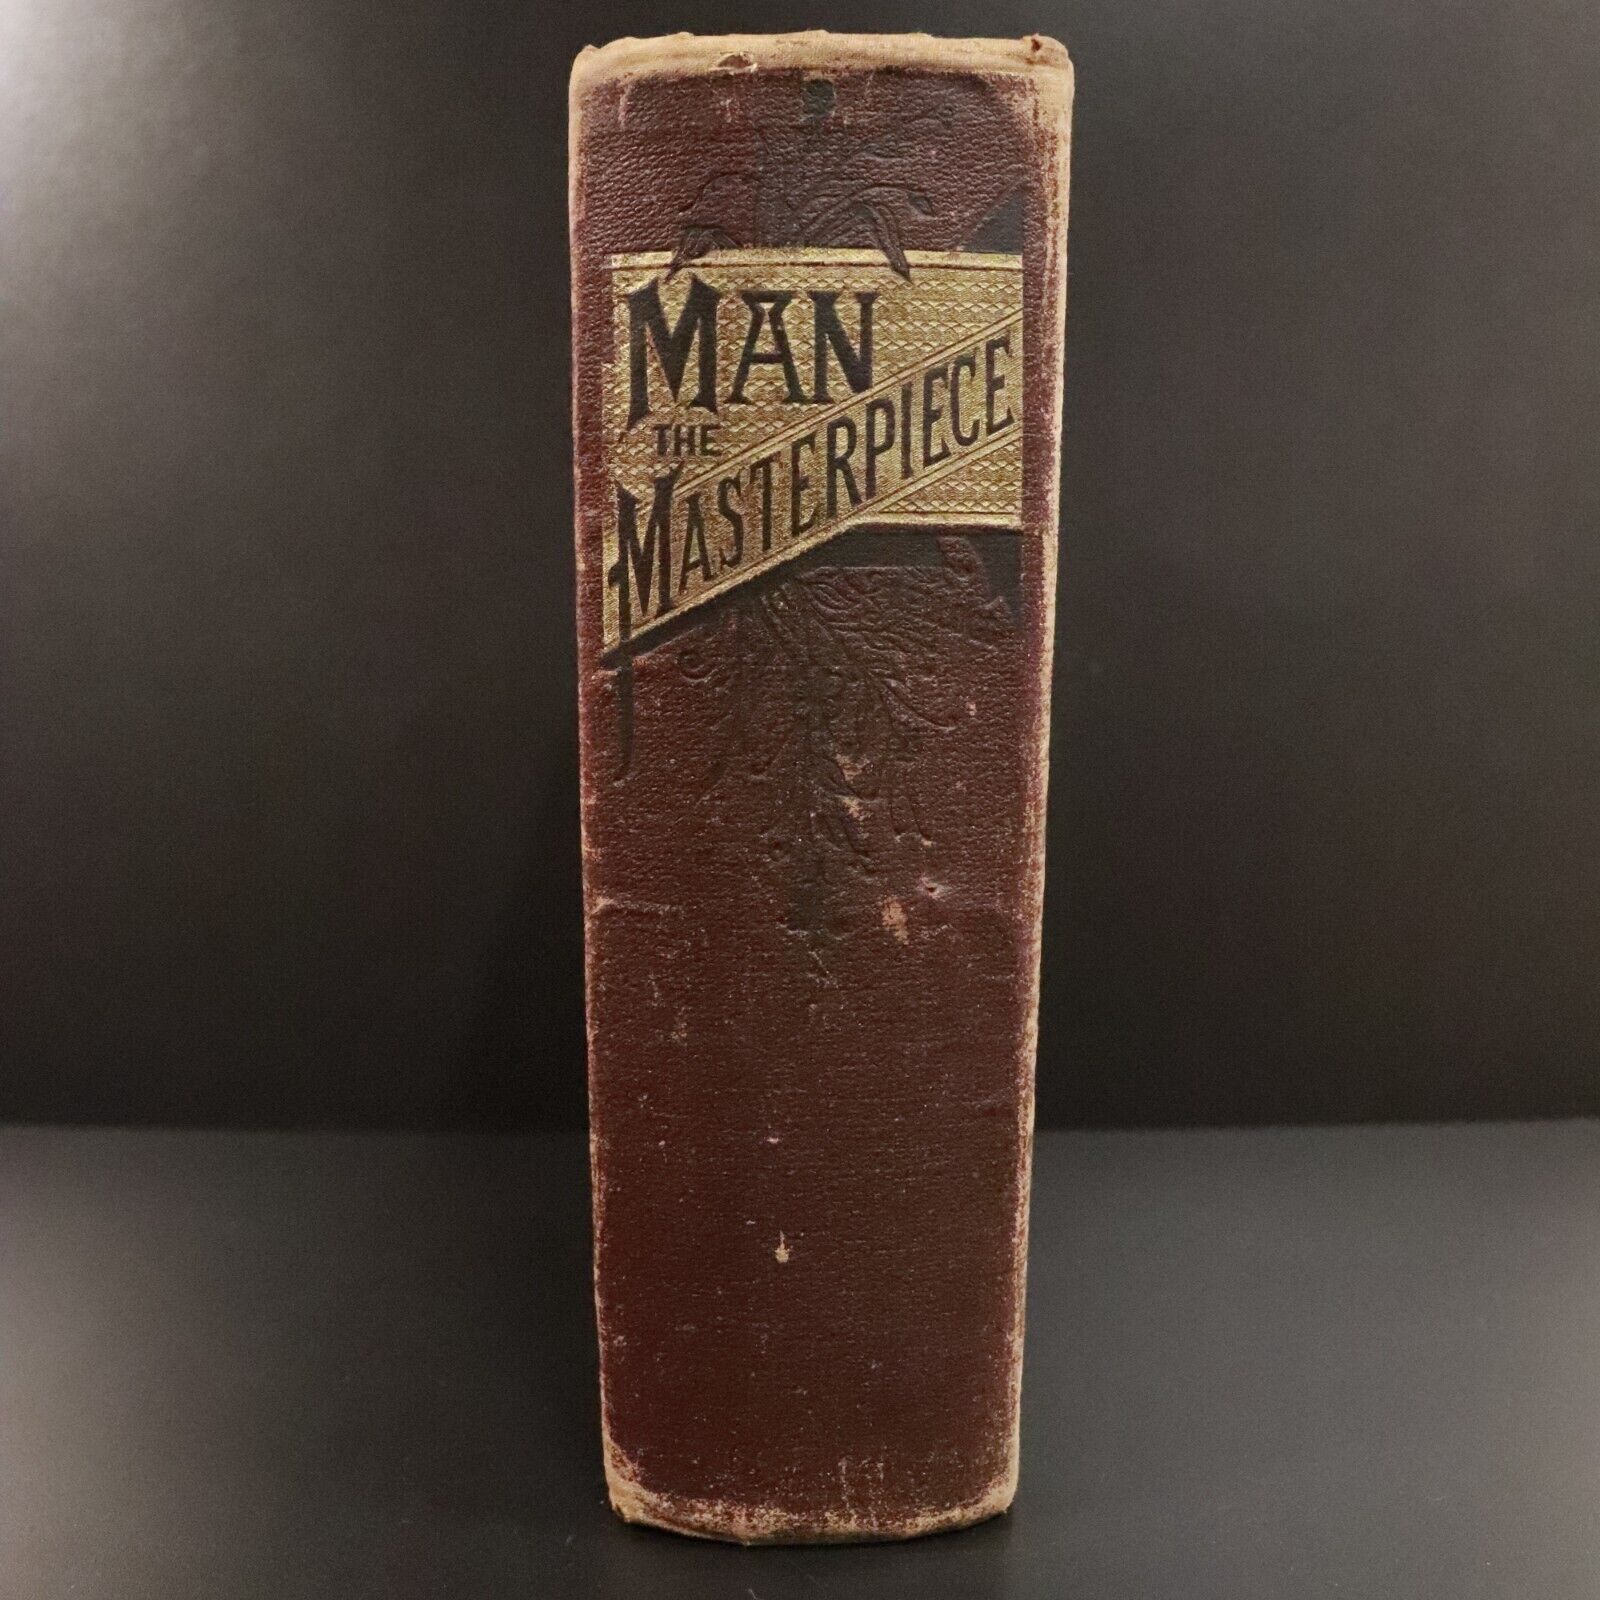 1886 Man The Masterpiece by J.H. Kellogg Illustrated Antiquarian Medical Book